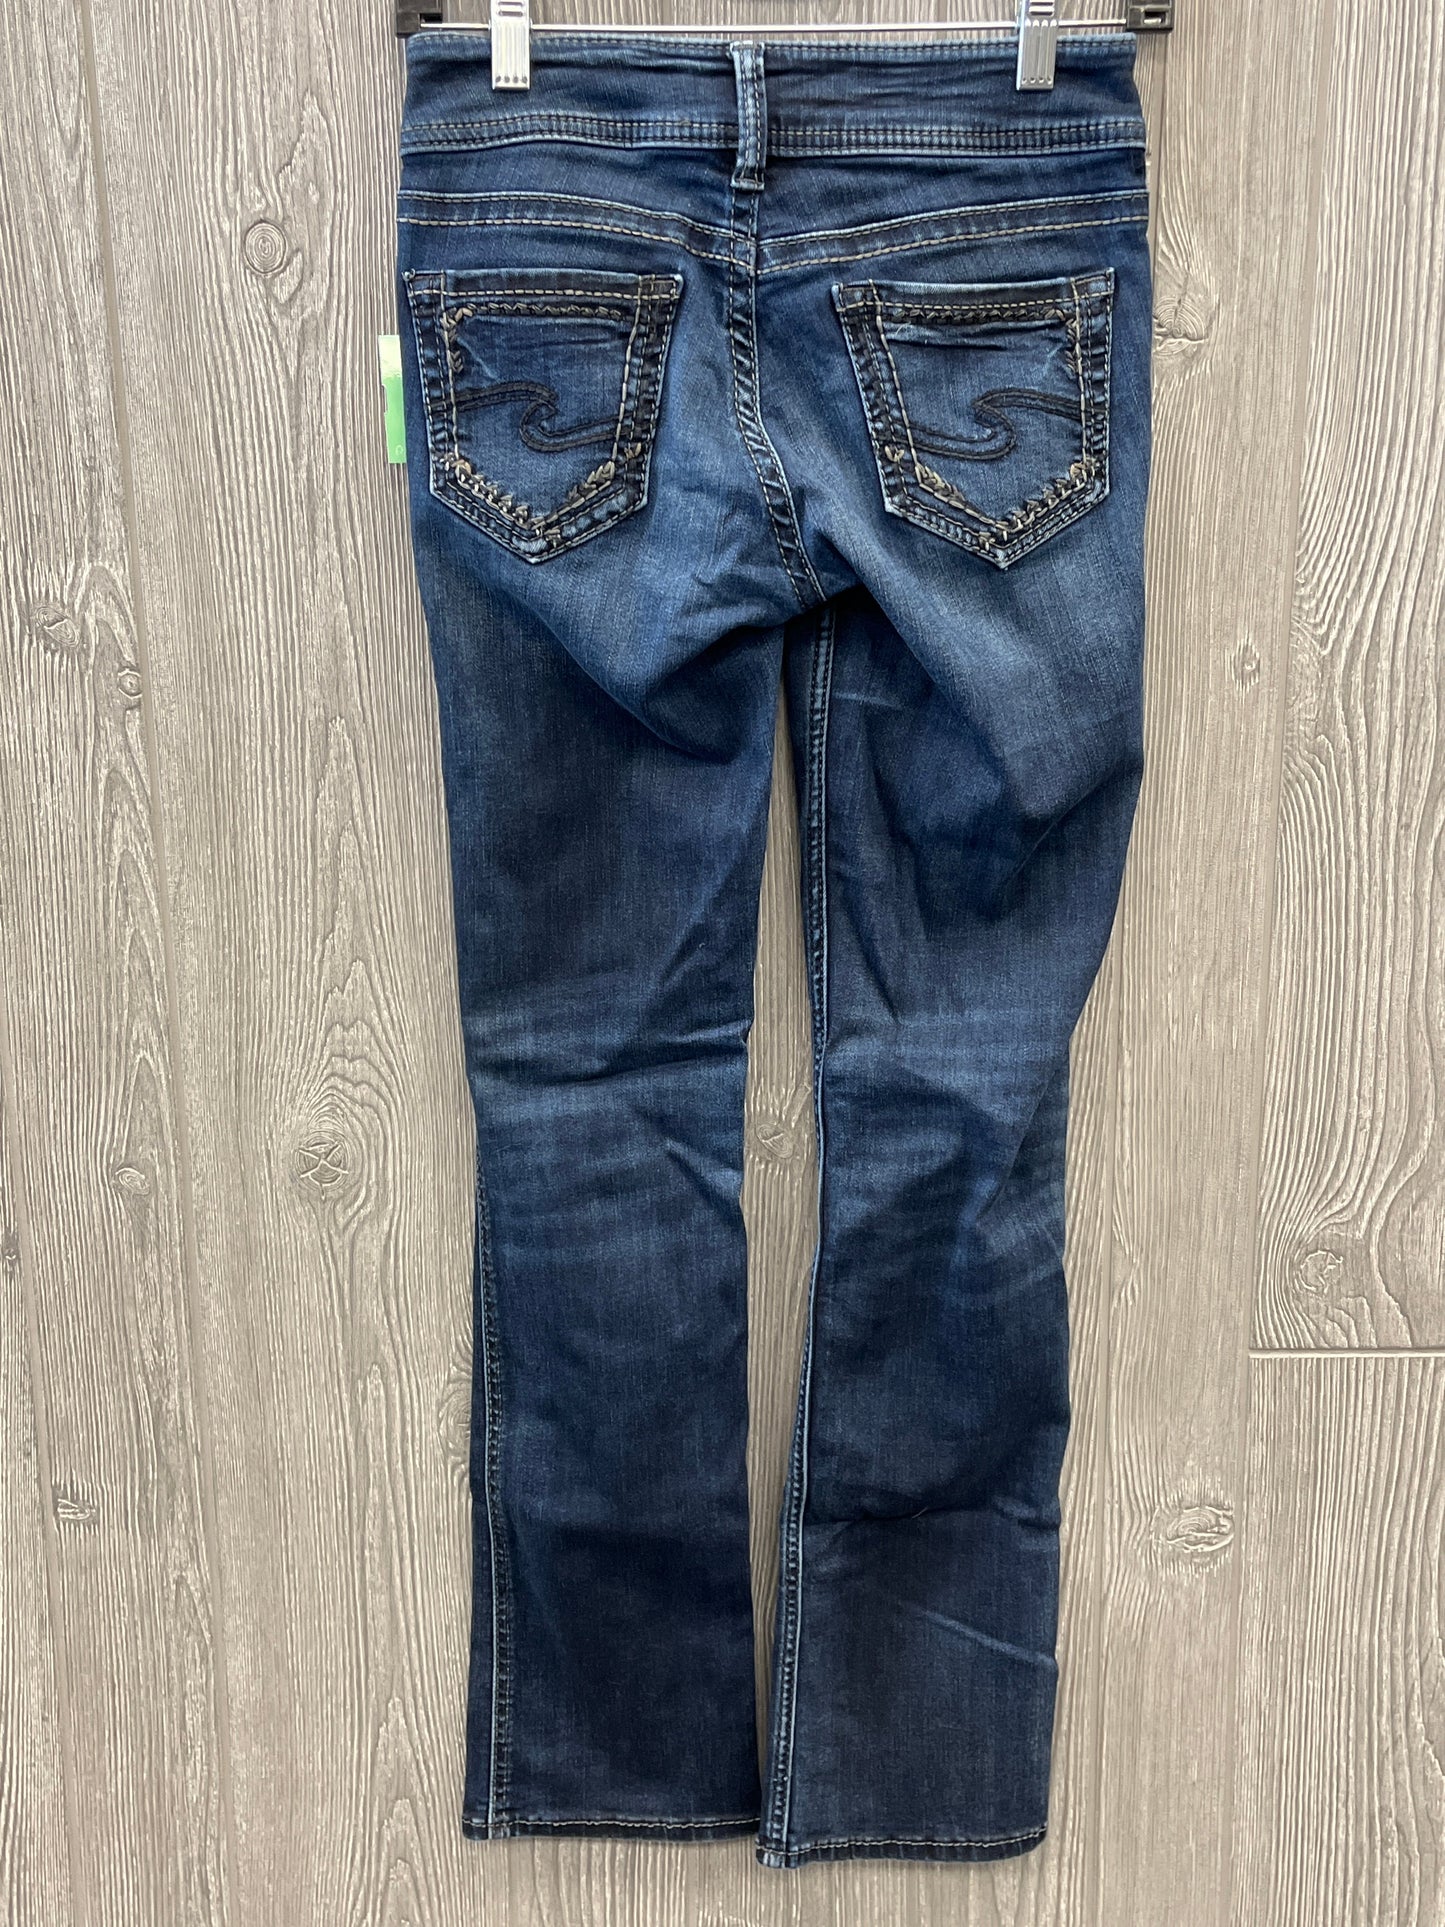 Jeans Boot Cut By Silver  Size: 2